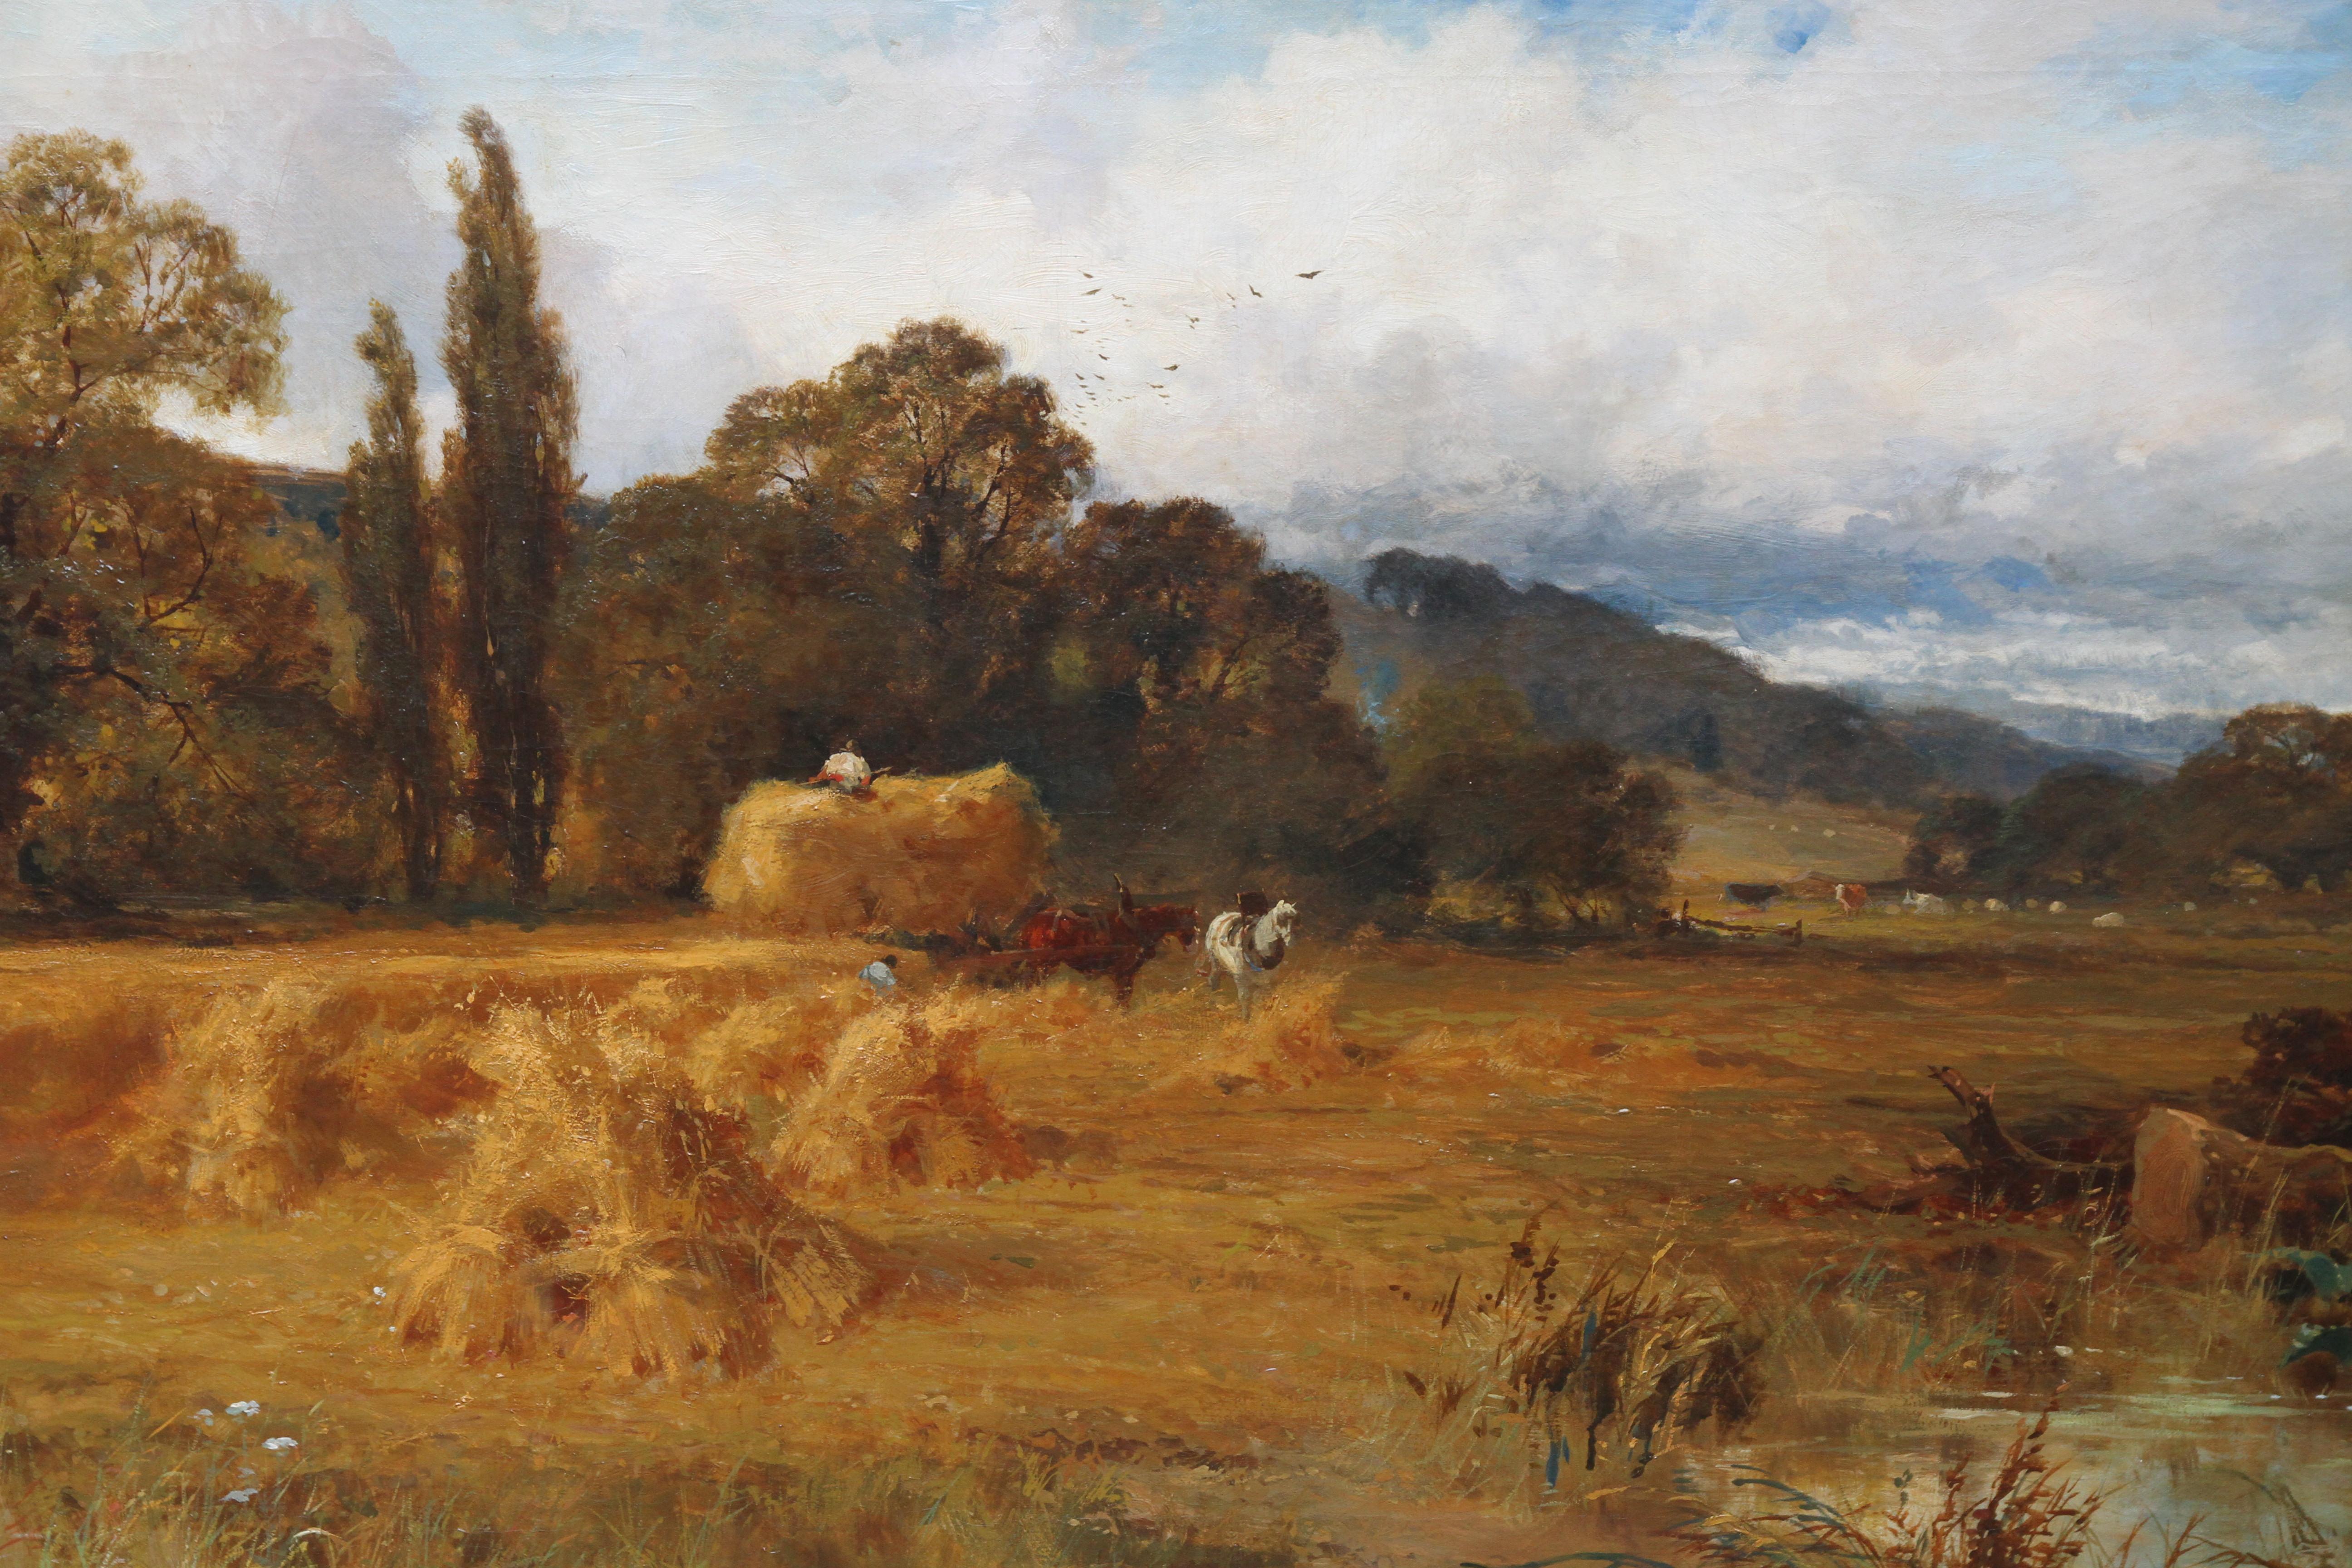 Harvest Time in Yorkshire - British art 19th century landscape oil painting - Painting by John Horace Hooper